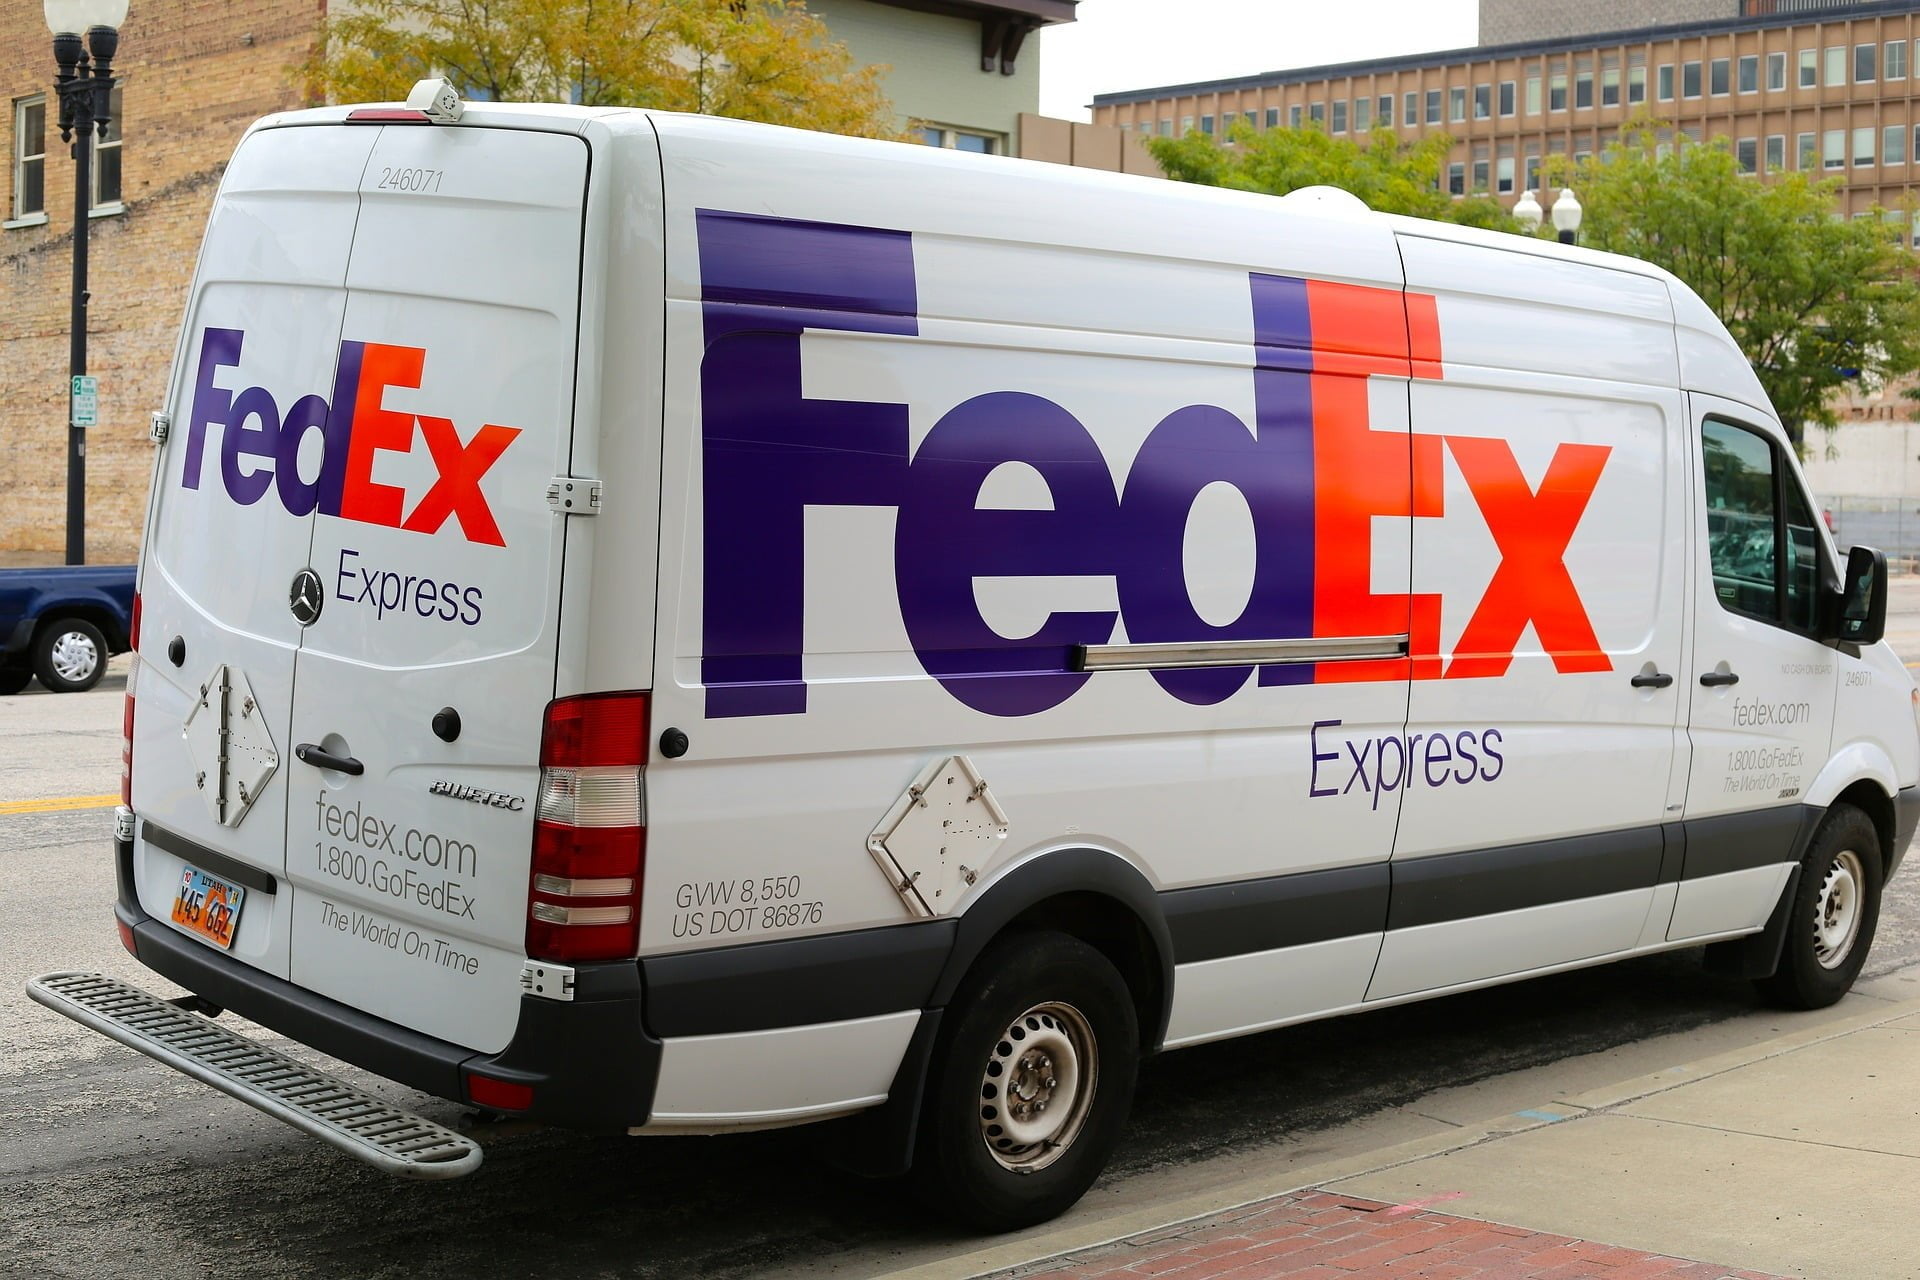 car g1c76f2fb3 1920 FedEx’s New Delivery Vans are All-electric, and Redesigned with the Driver in Mind